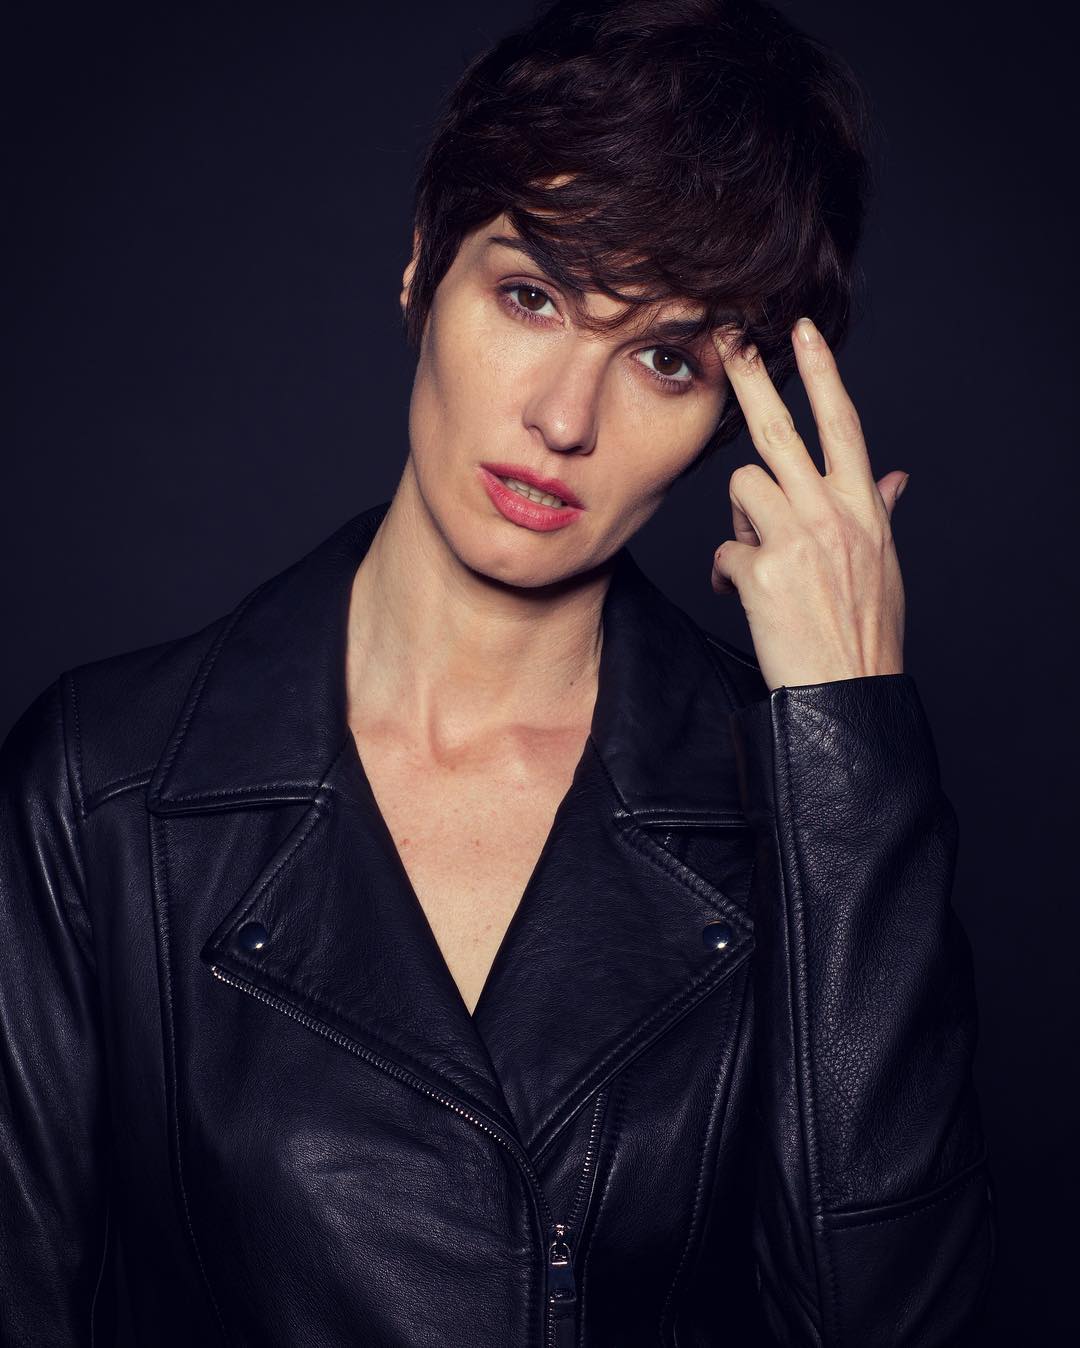 49 Hot Pictures Of Paz Vega Are Too Damn Appealing | Best Of Comic Books